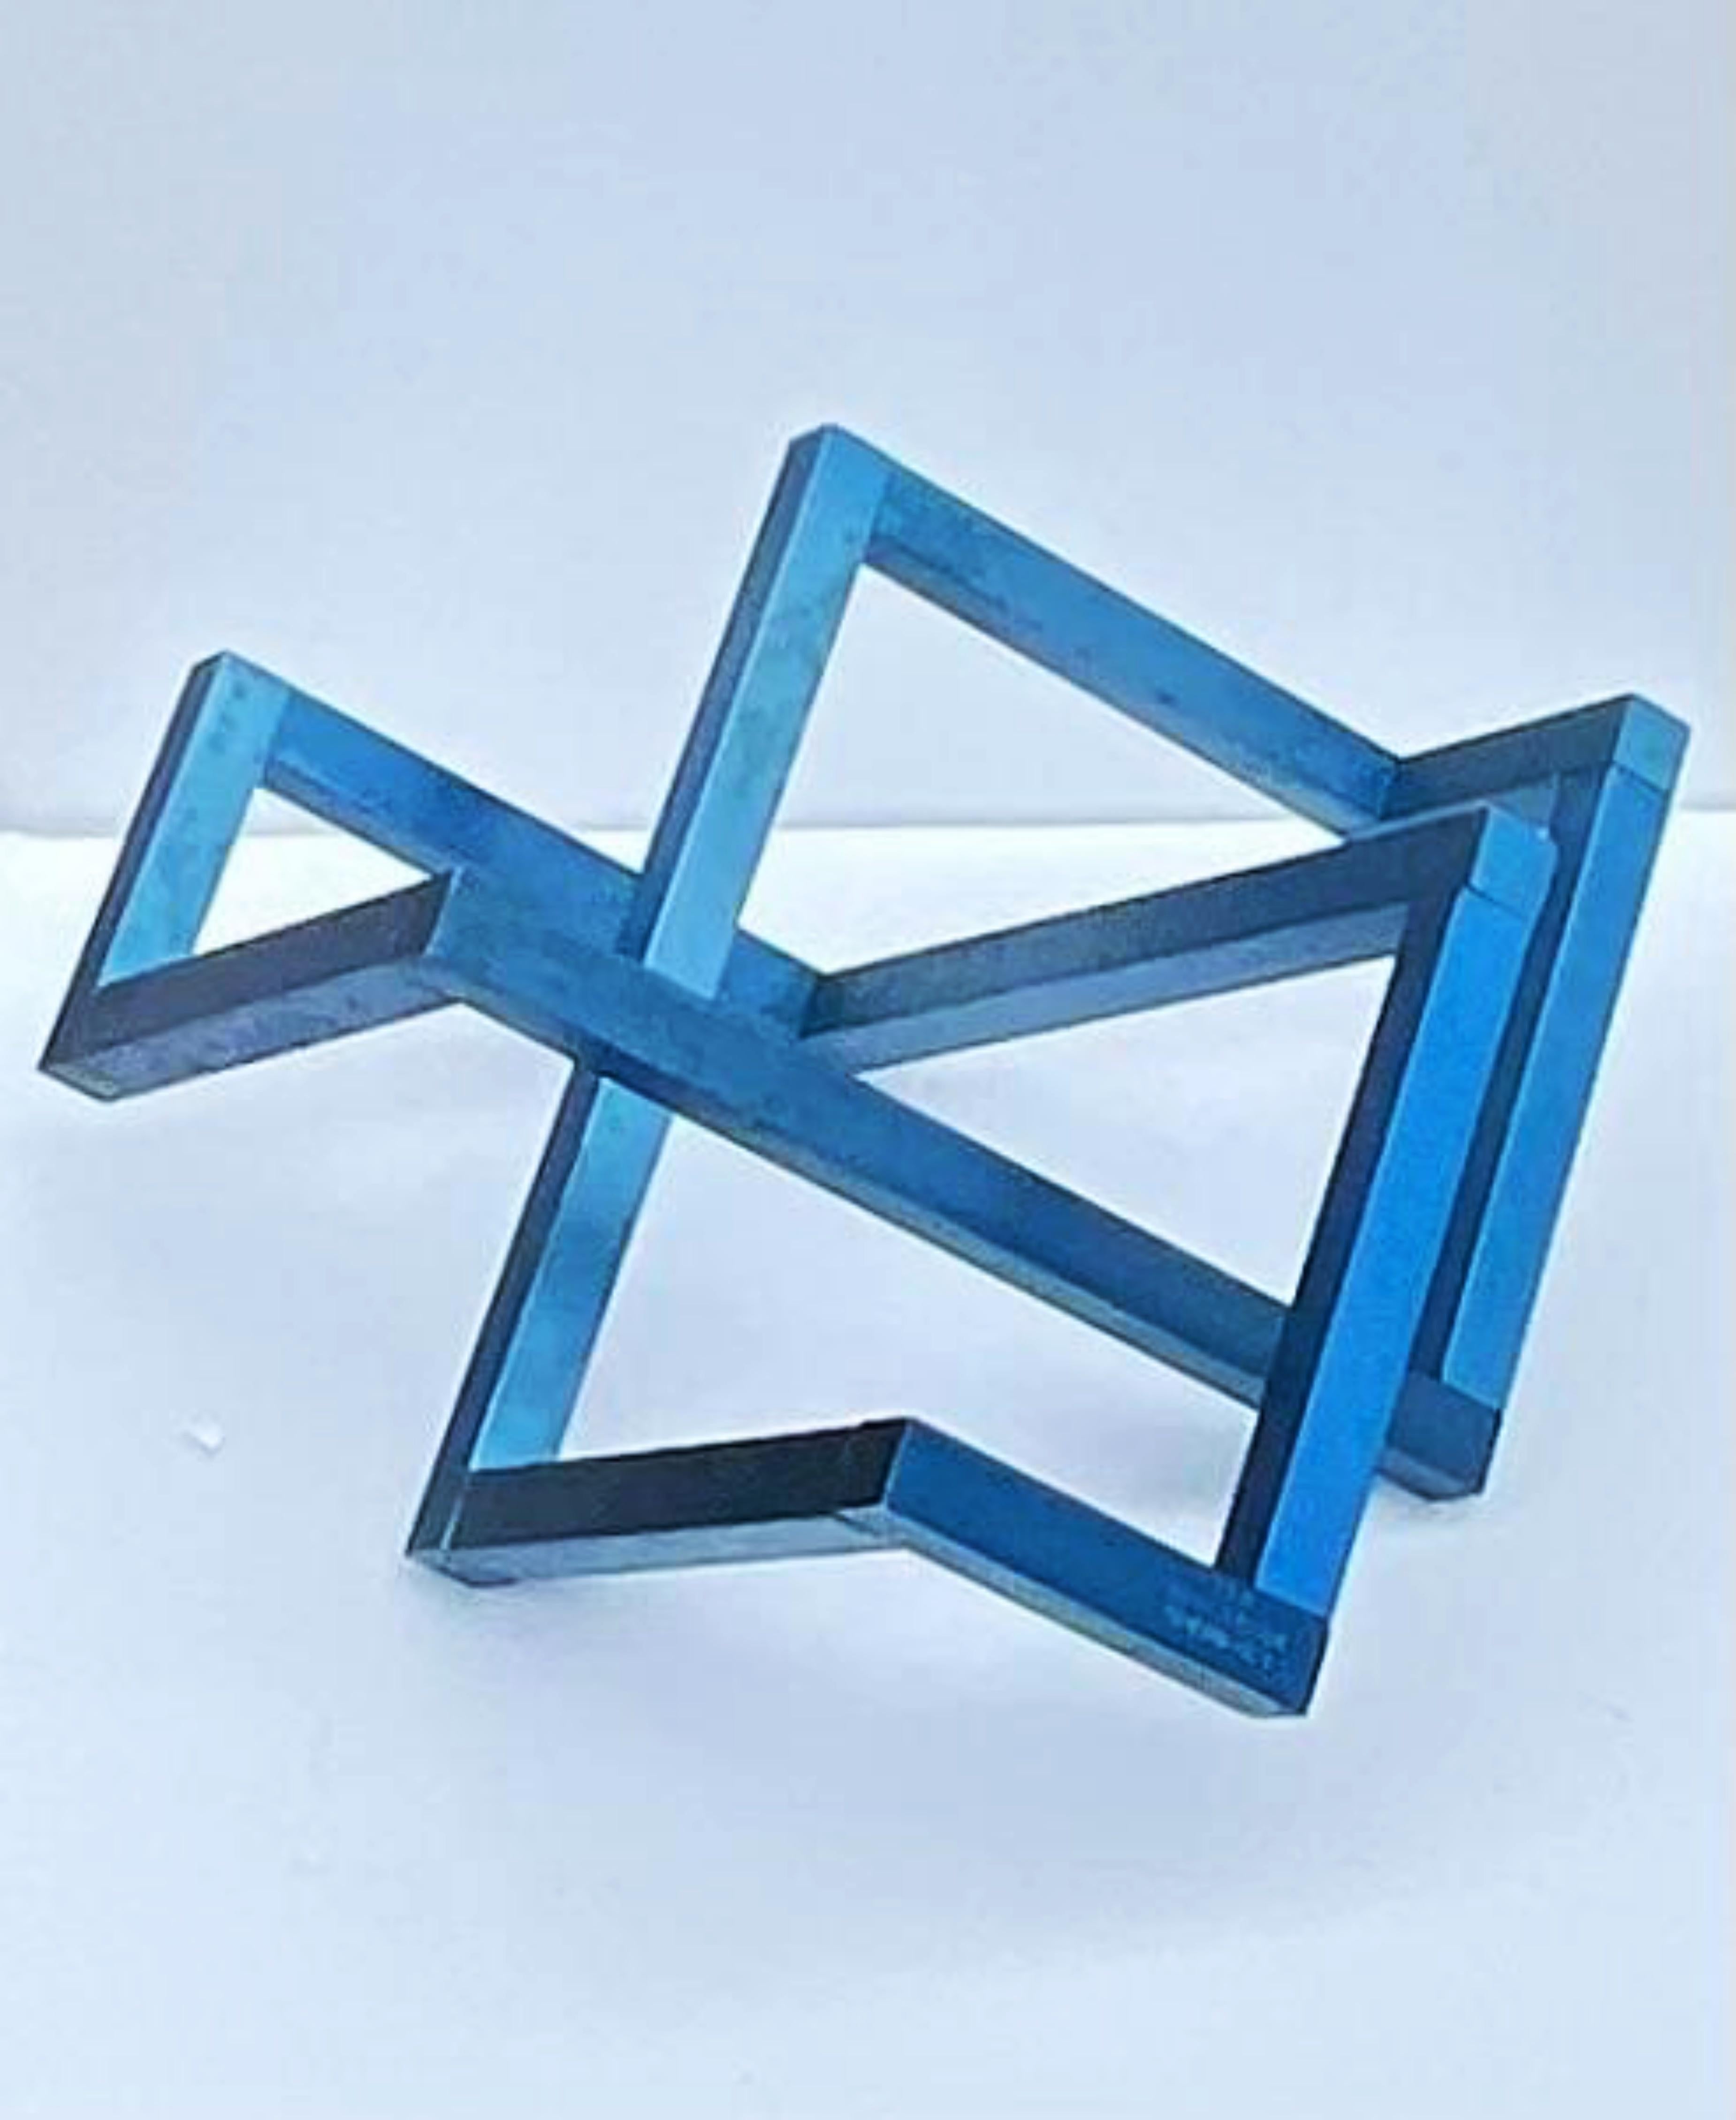 Geometric abstraction mid century modern constructivist painted metal sculpture  For Sale 2